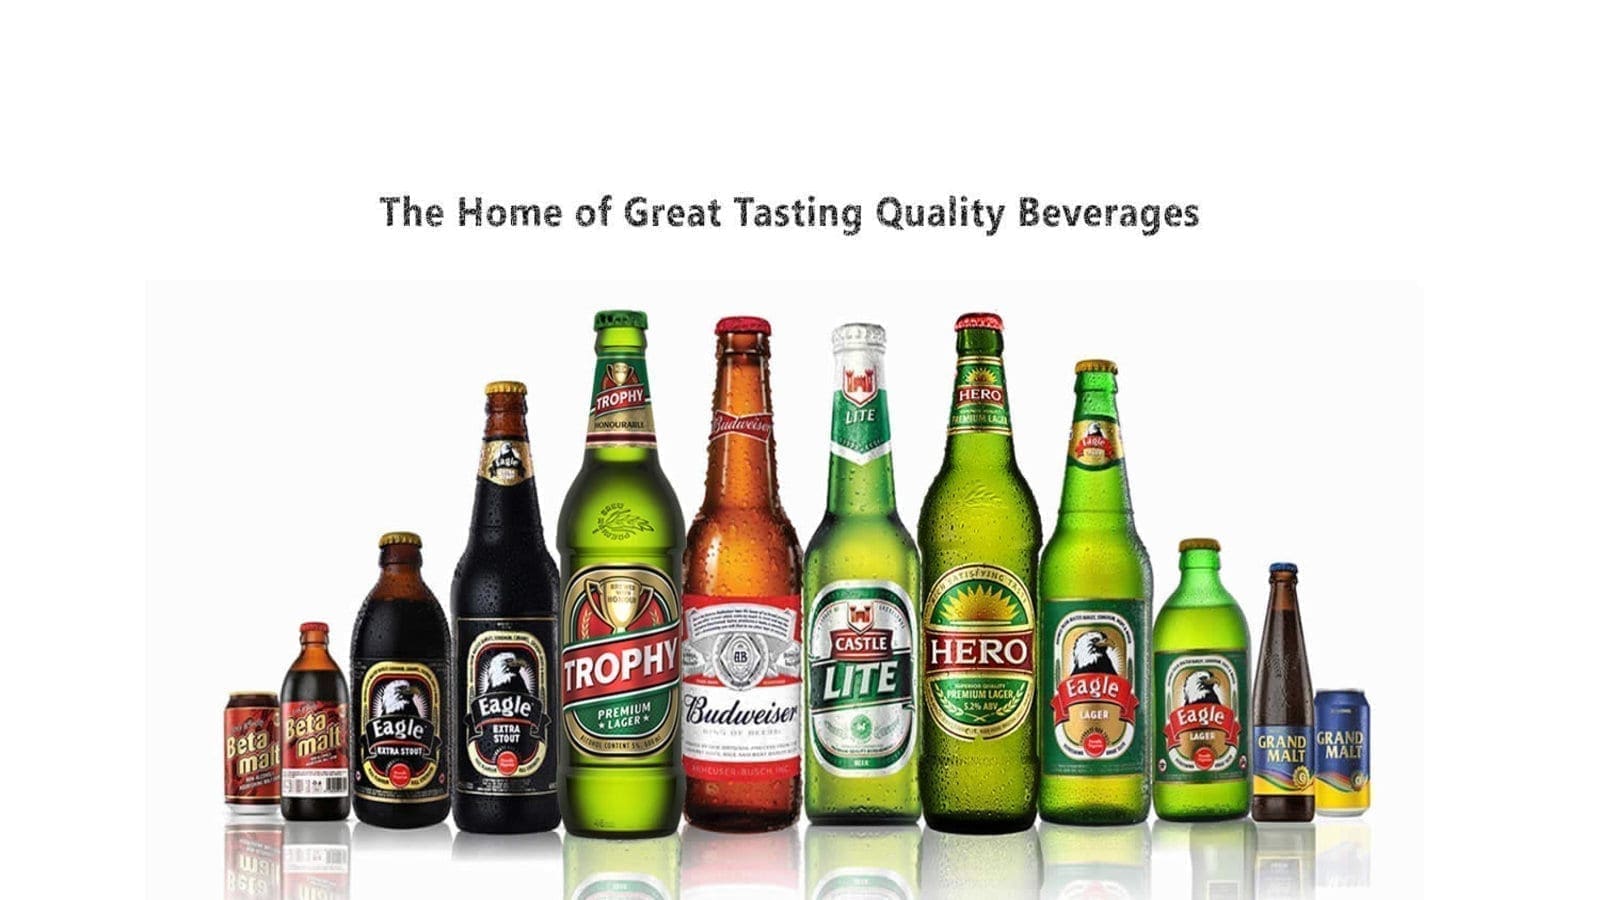 International Breweries grows revenue by 32.1% in Q3 2021 riding on consumer loyalty